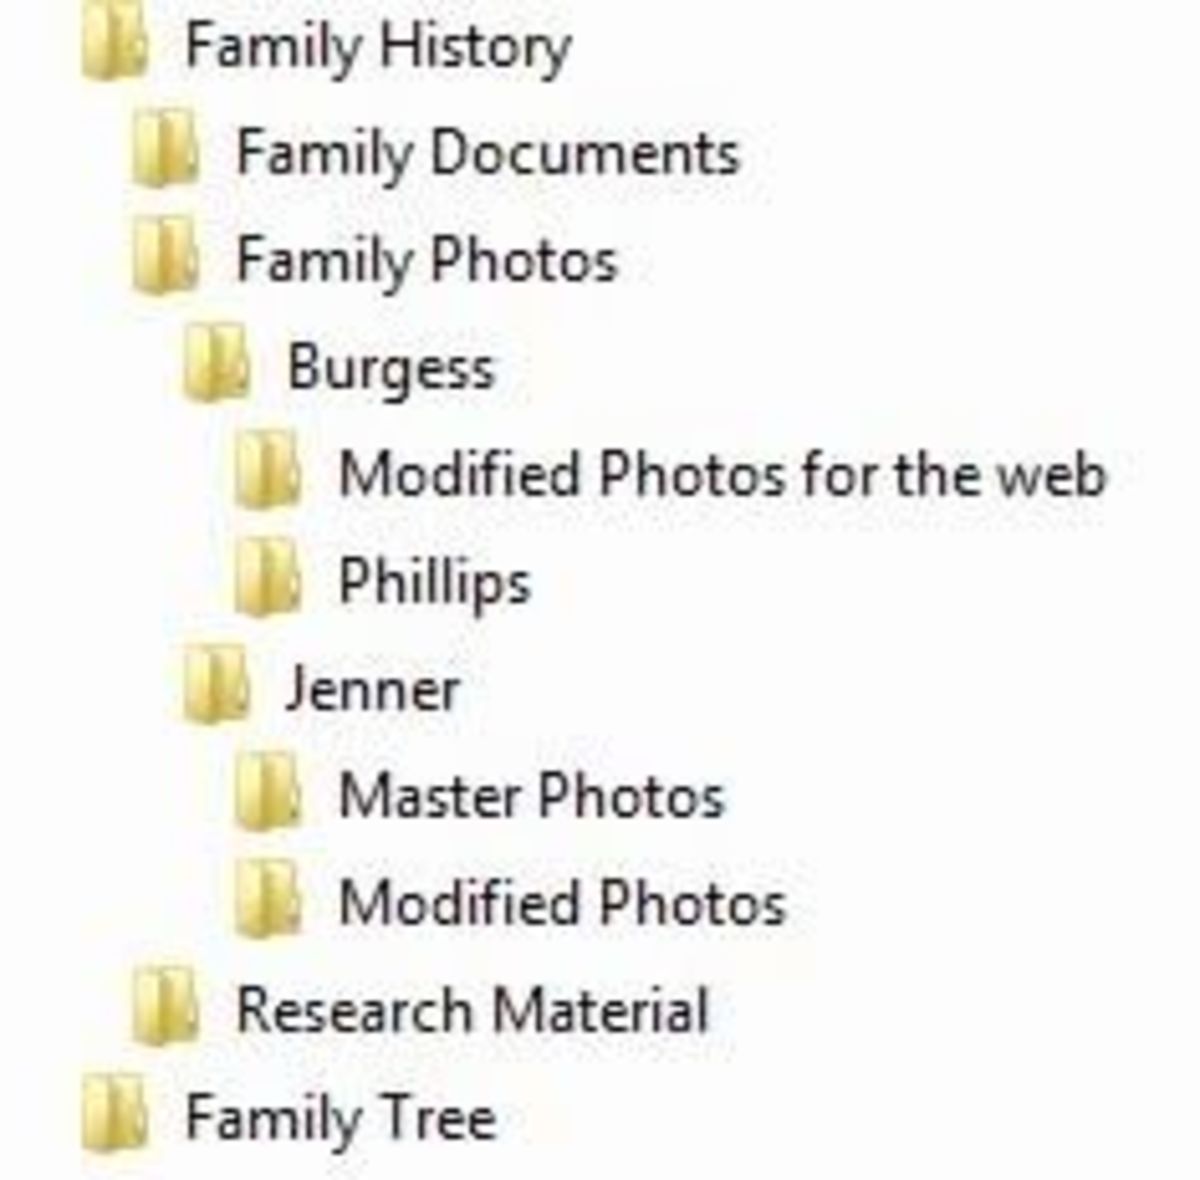 Organise your file structure on your computer